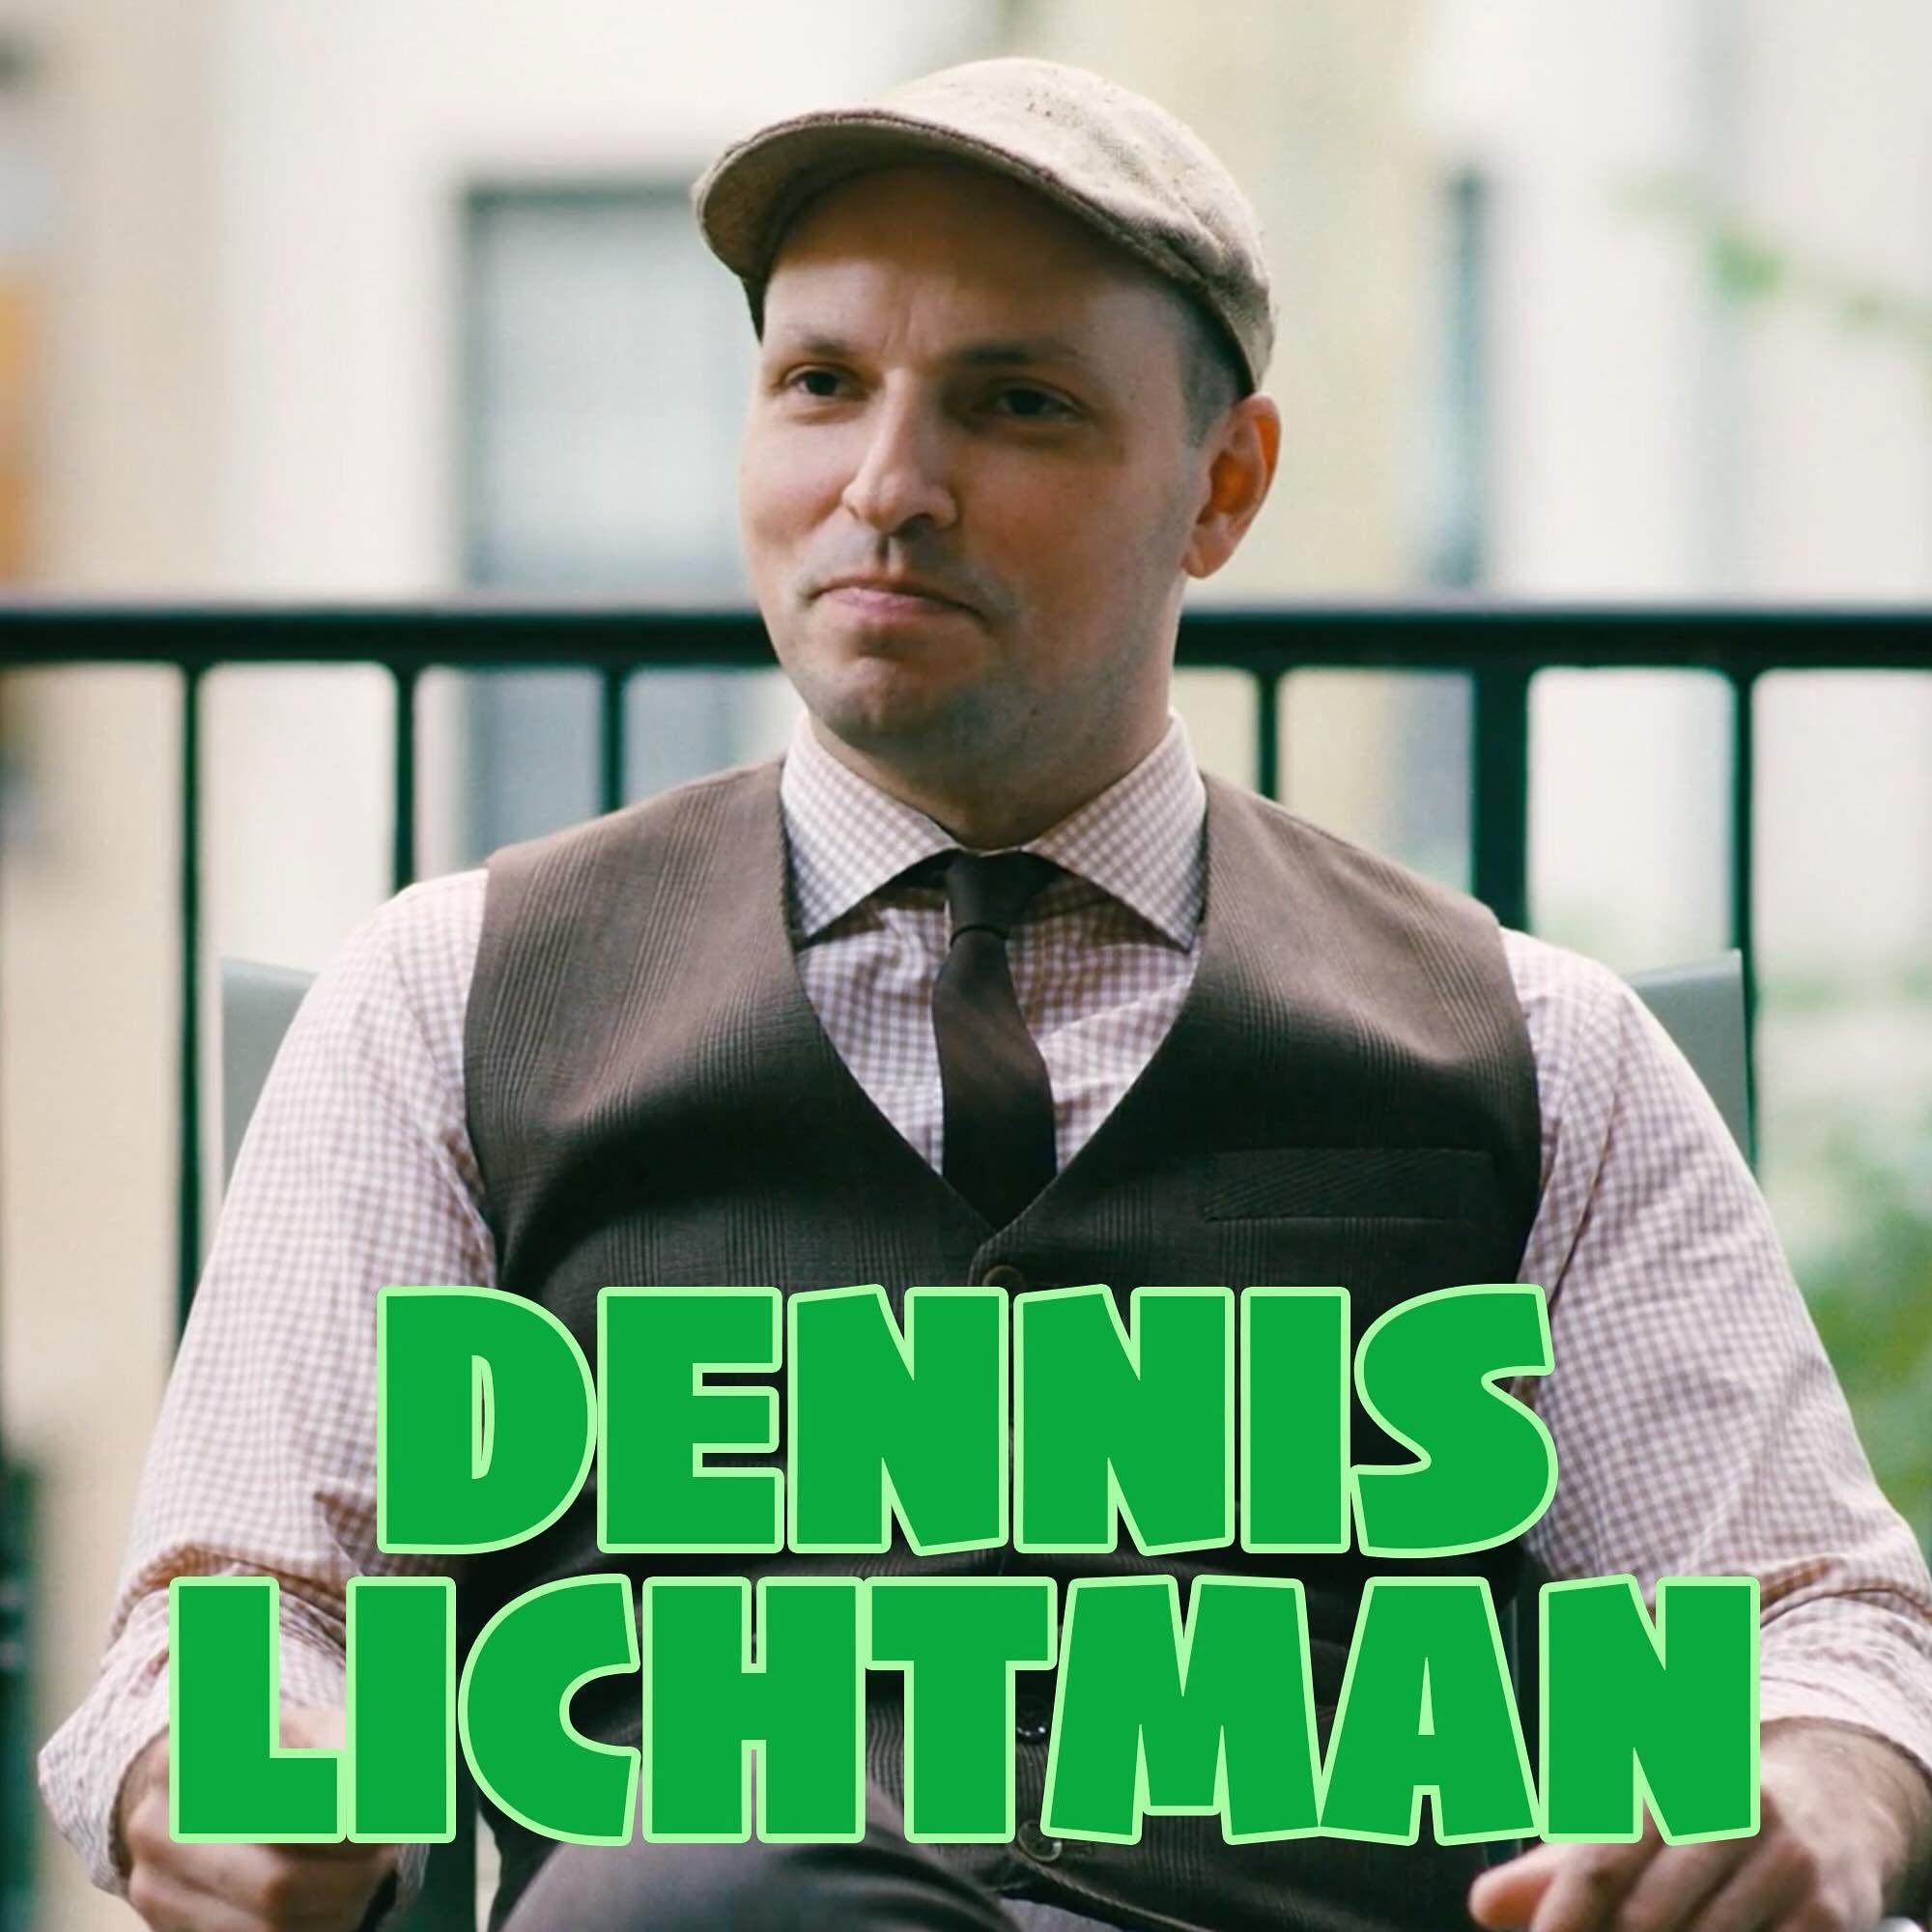 We&rsquo;re back with the third episode of &ldquo;On The Back Porch&rdquo; welcoming the marvelous @dennislichtman 

Dennis is a multi-instrumentalist and has been the clarinetist and bandleader of the famed Tuesday night traditional-jazz jam session